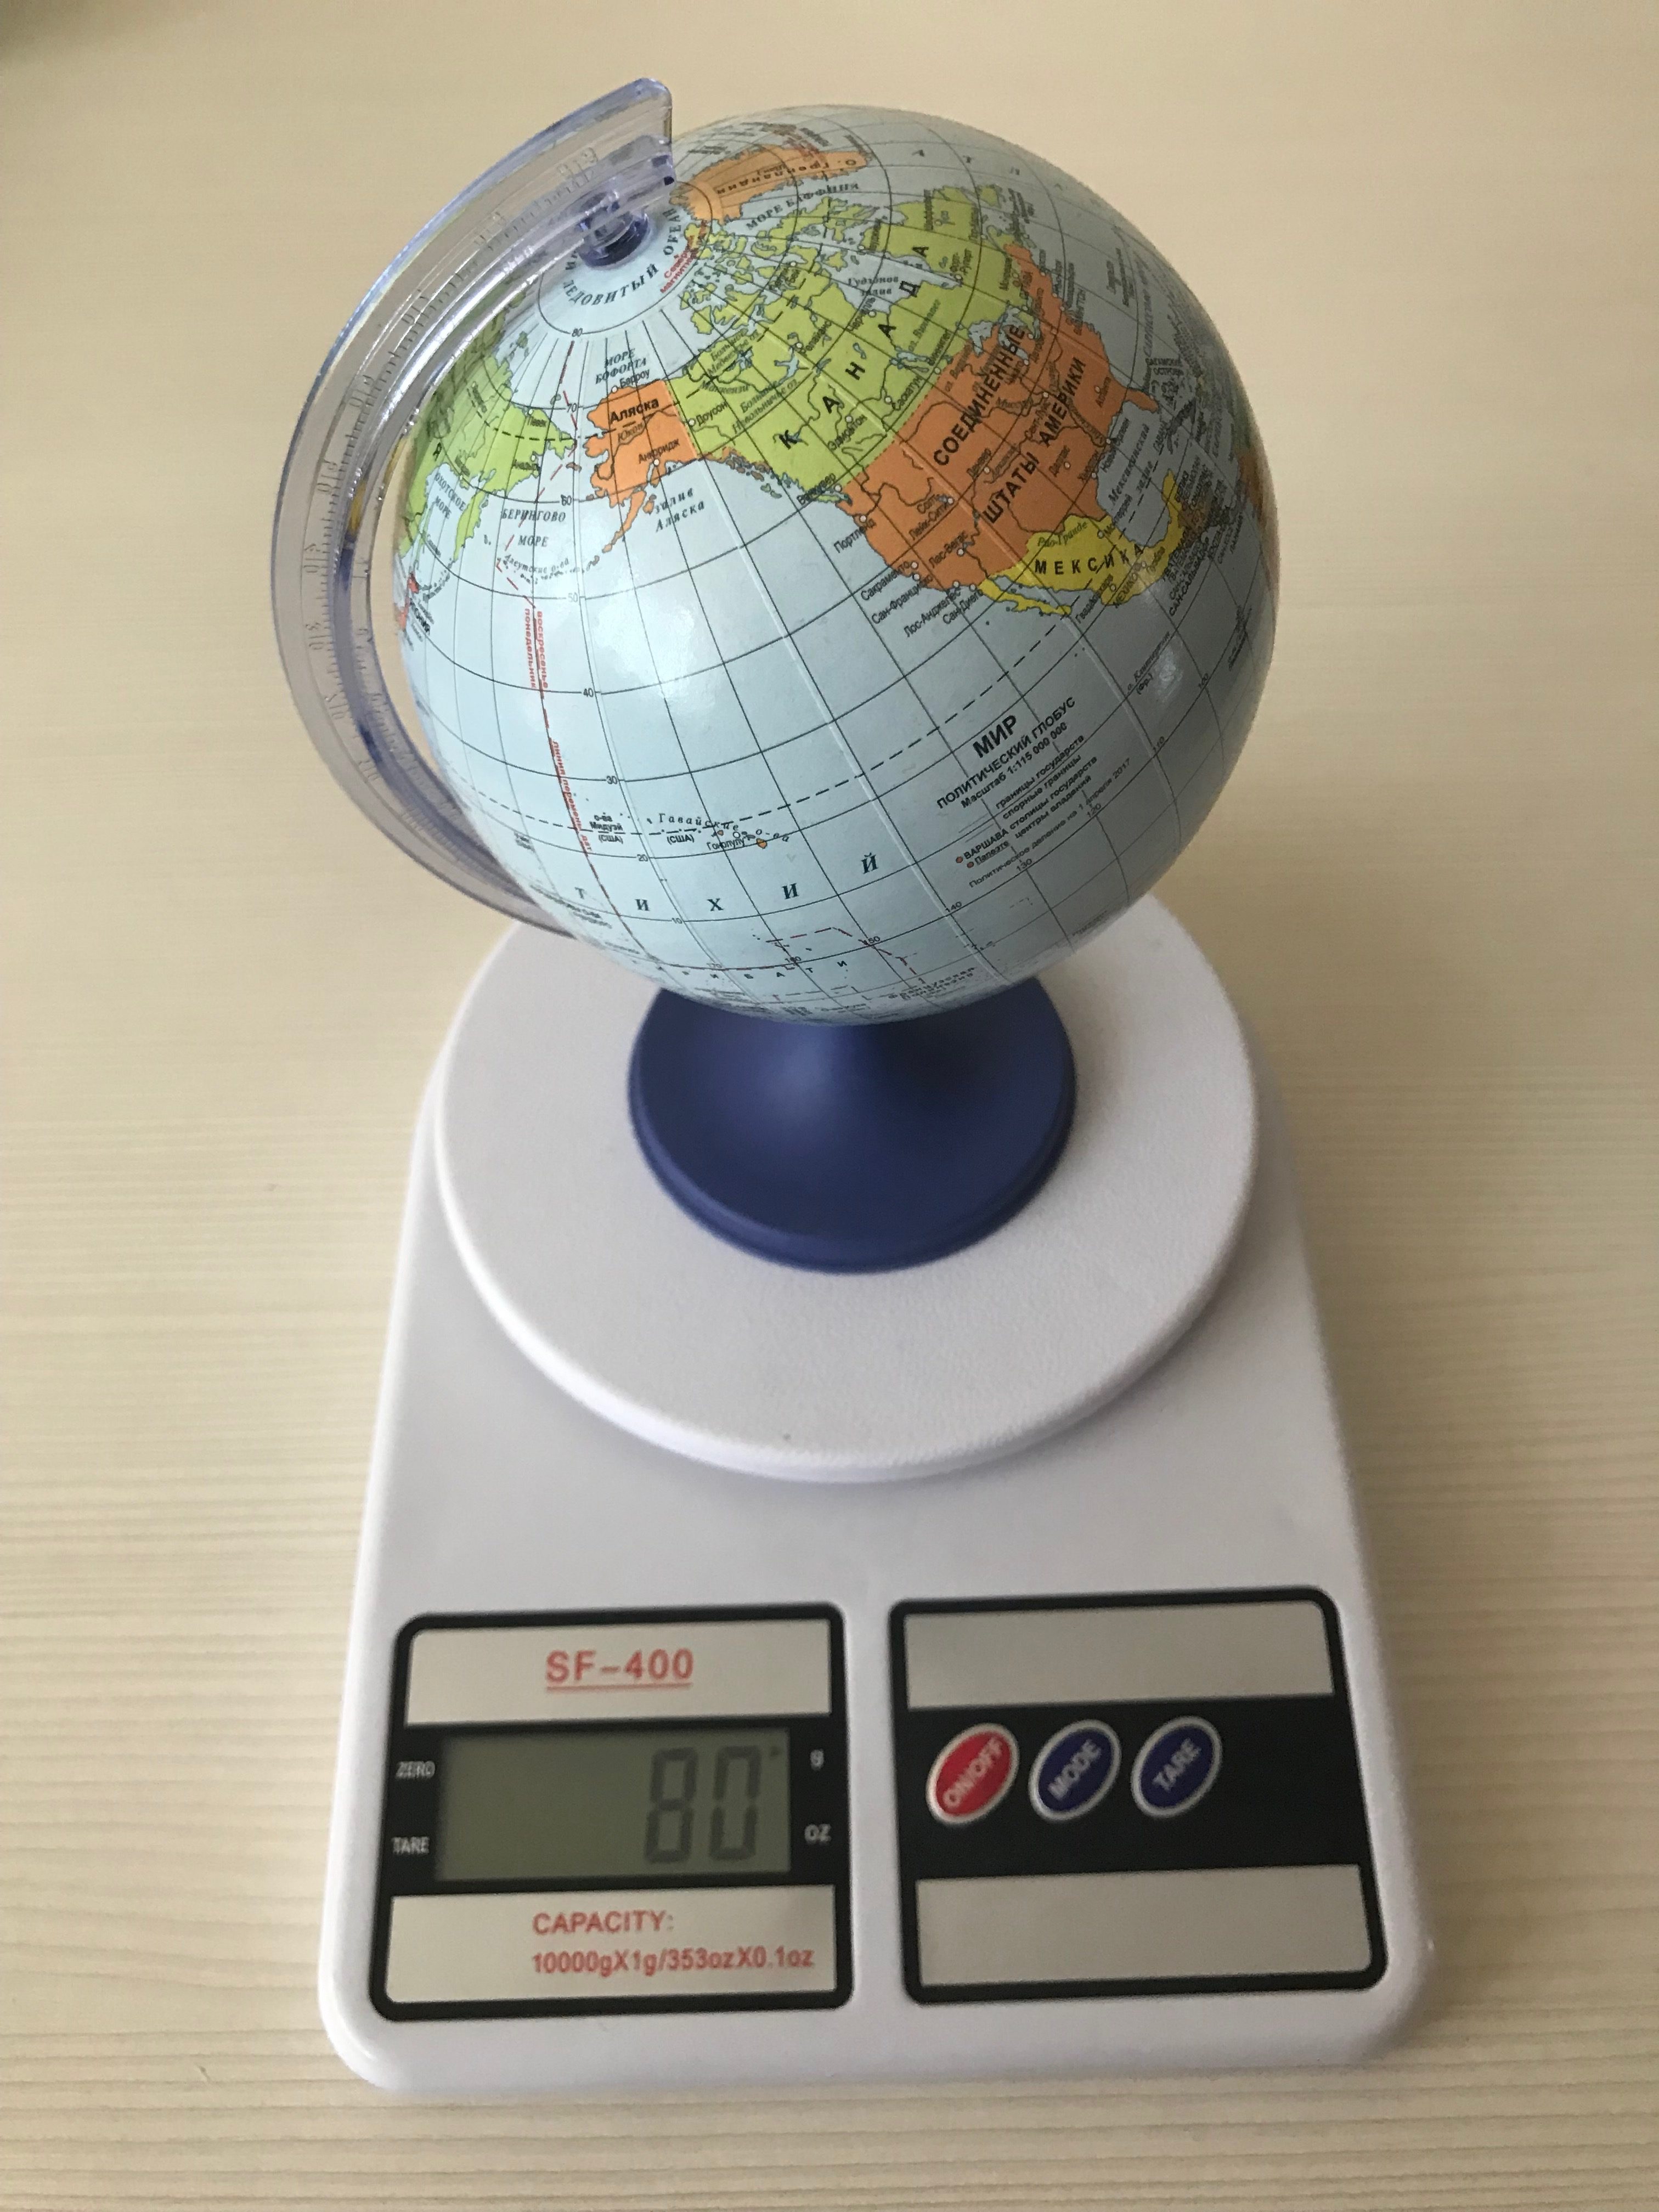 How much does the globe weigh (plastic, medium size)?